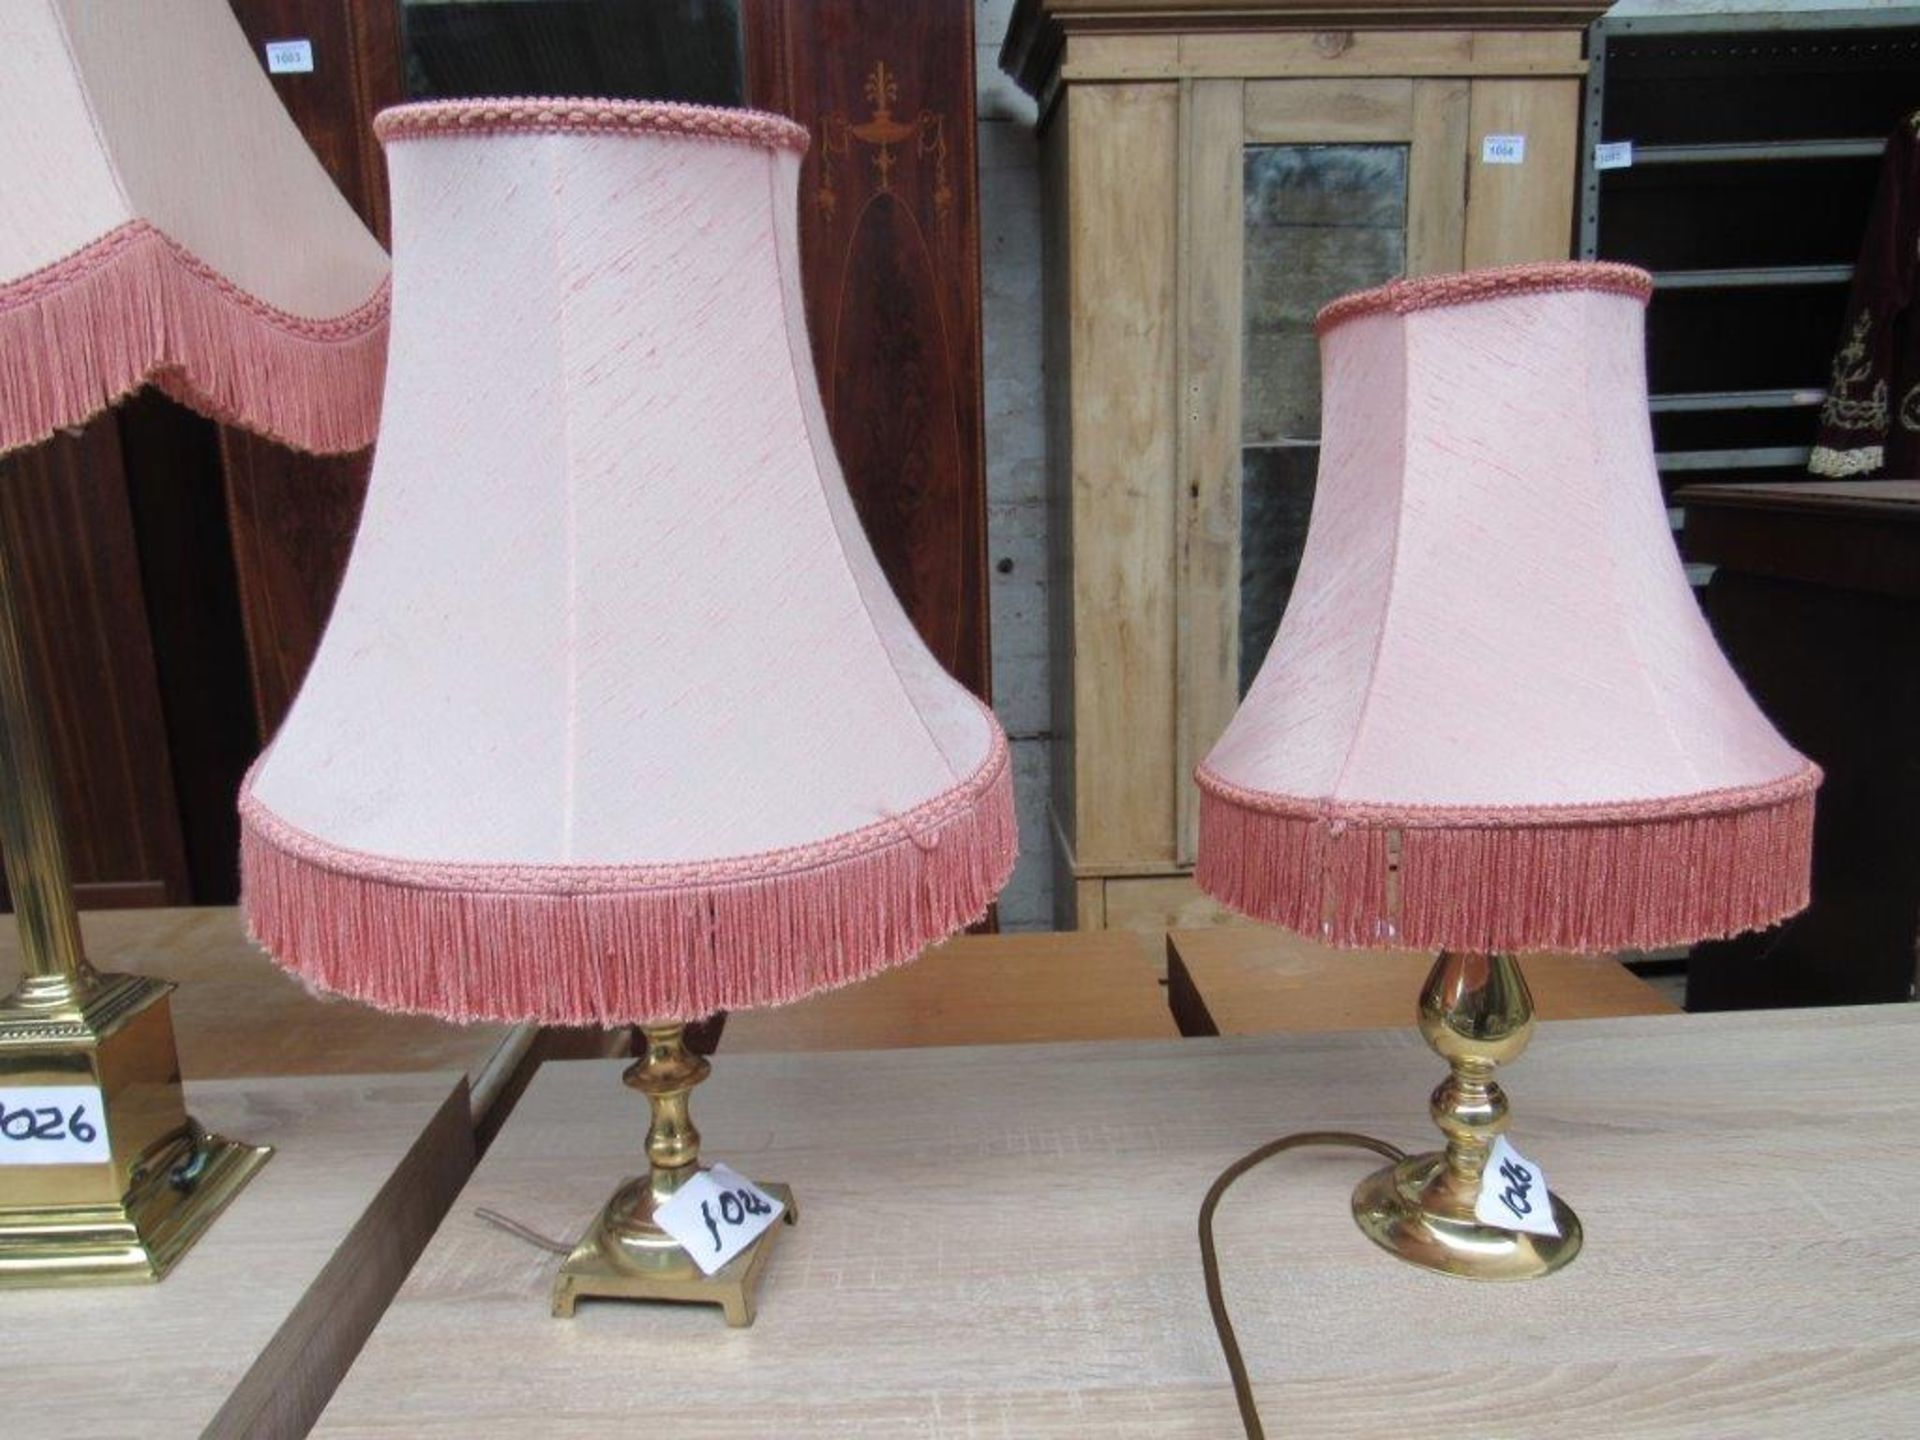 Pair of Onyx table lamps and shades, height of lamp 28cms. Brass and marble columned table lamp - Image 3 of 3